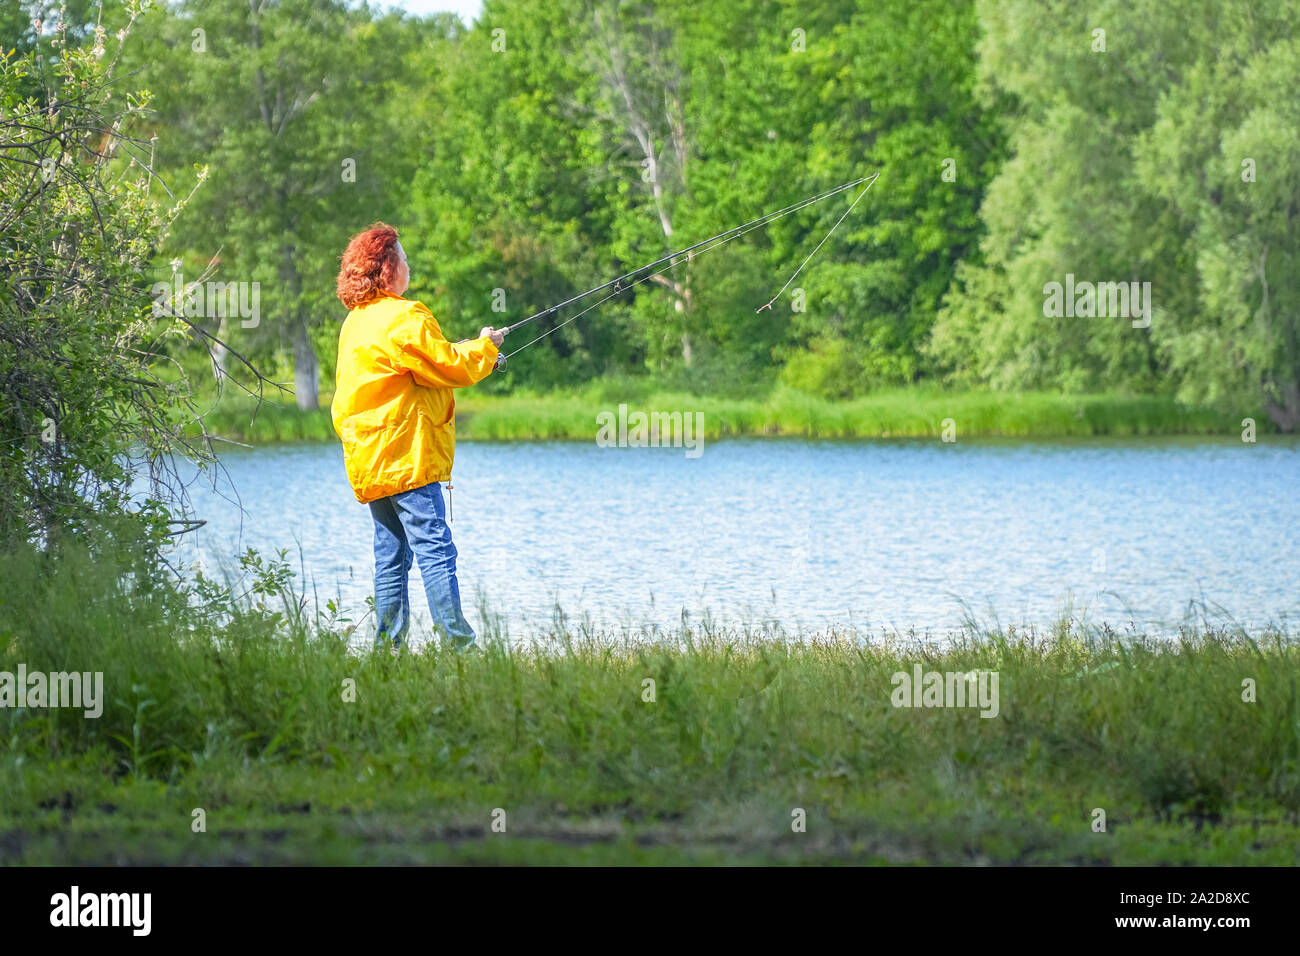 Woman in yellow jacket fishing spinning on the lake Stock Photo - Alamy